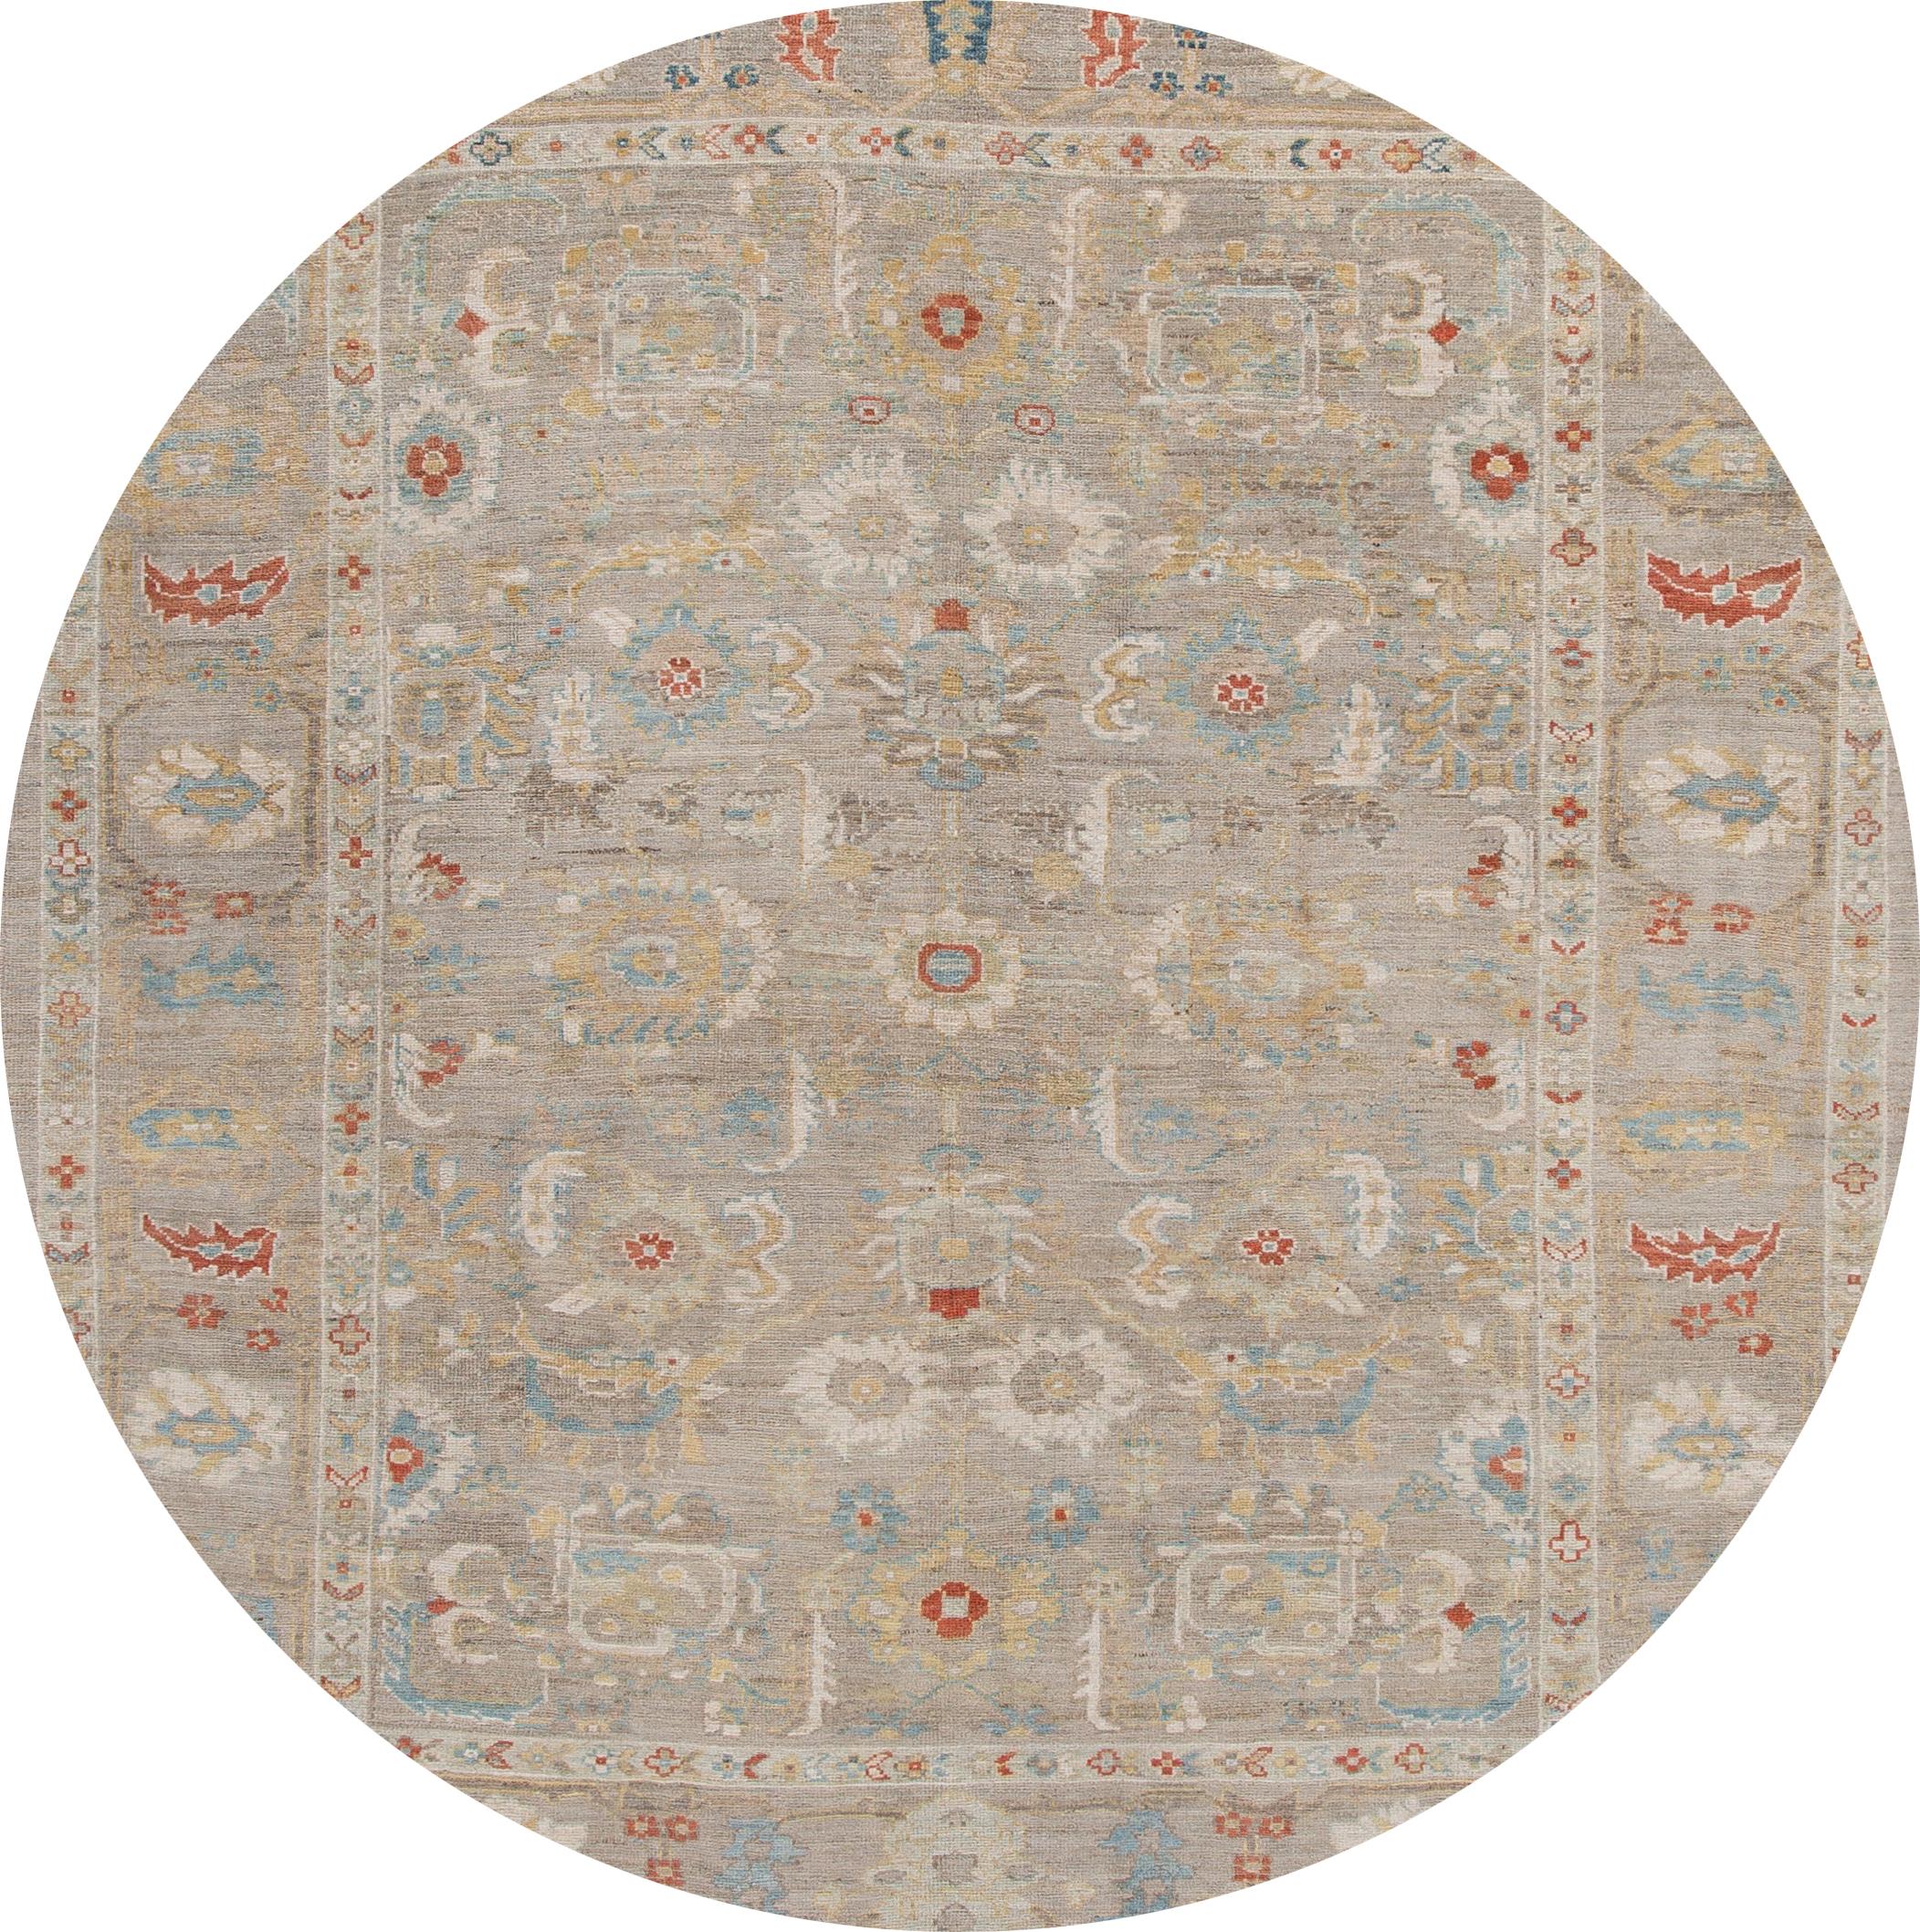 Beautiful contemporary Sultanabad rug, hand knotted wool with a beige field, ivory, blue, and red accents in all-over Classic floral medallion design.

This rug measures: 8'6